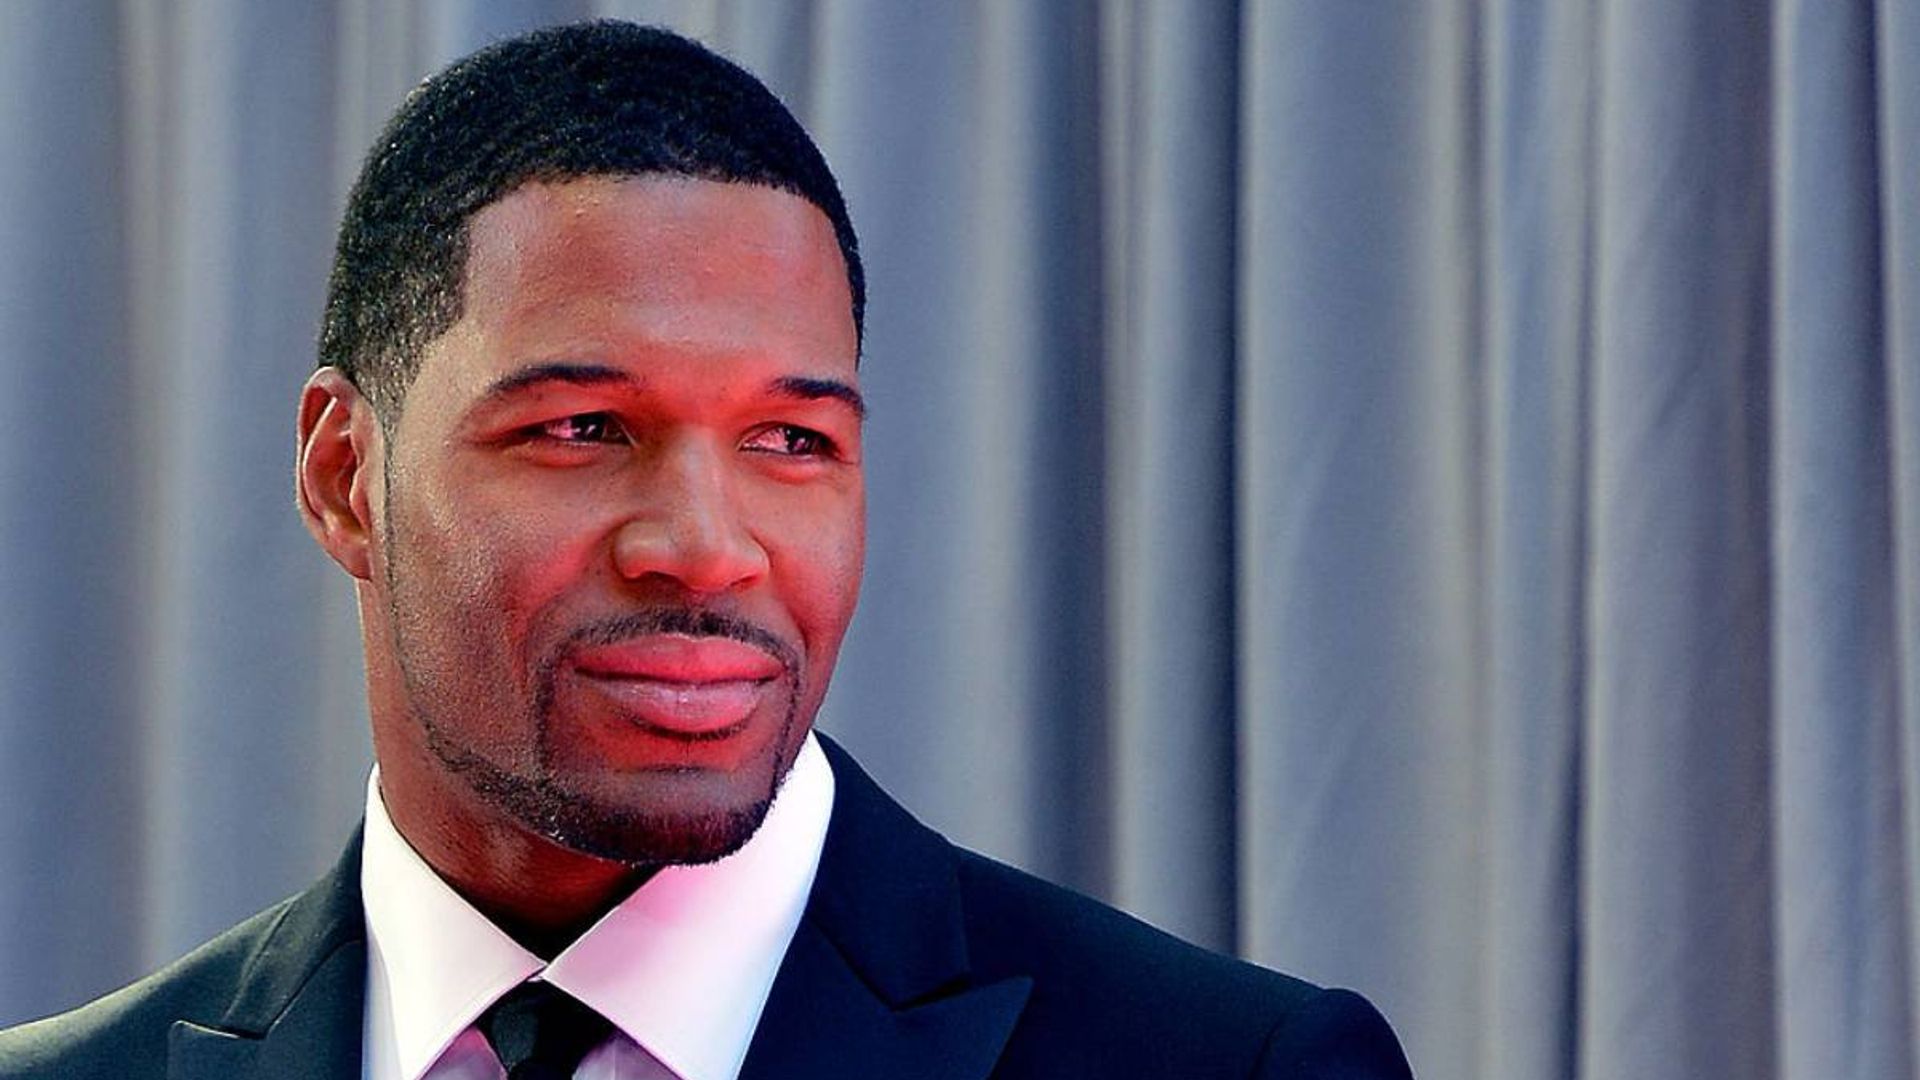 Michael Strahan's sister: The heartbreaking story of his family tragedy